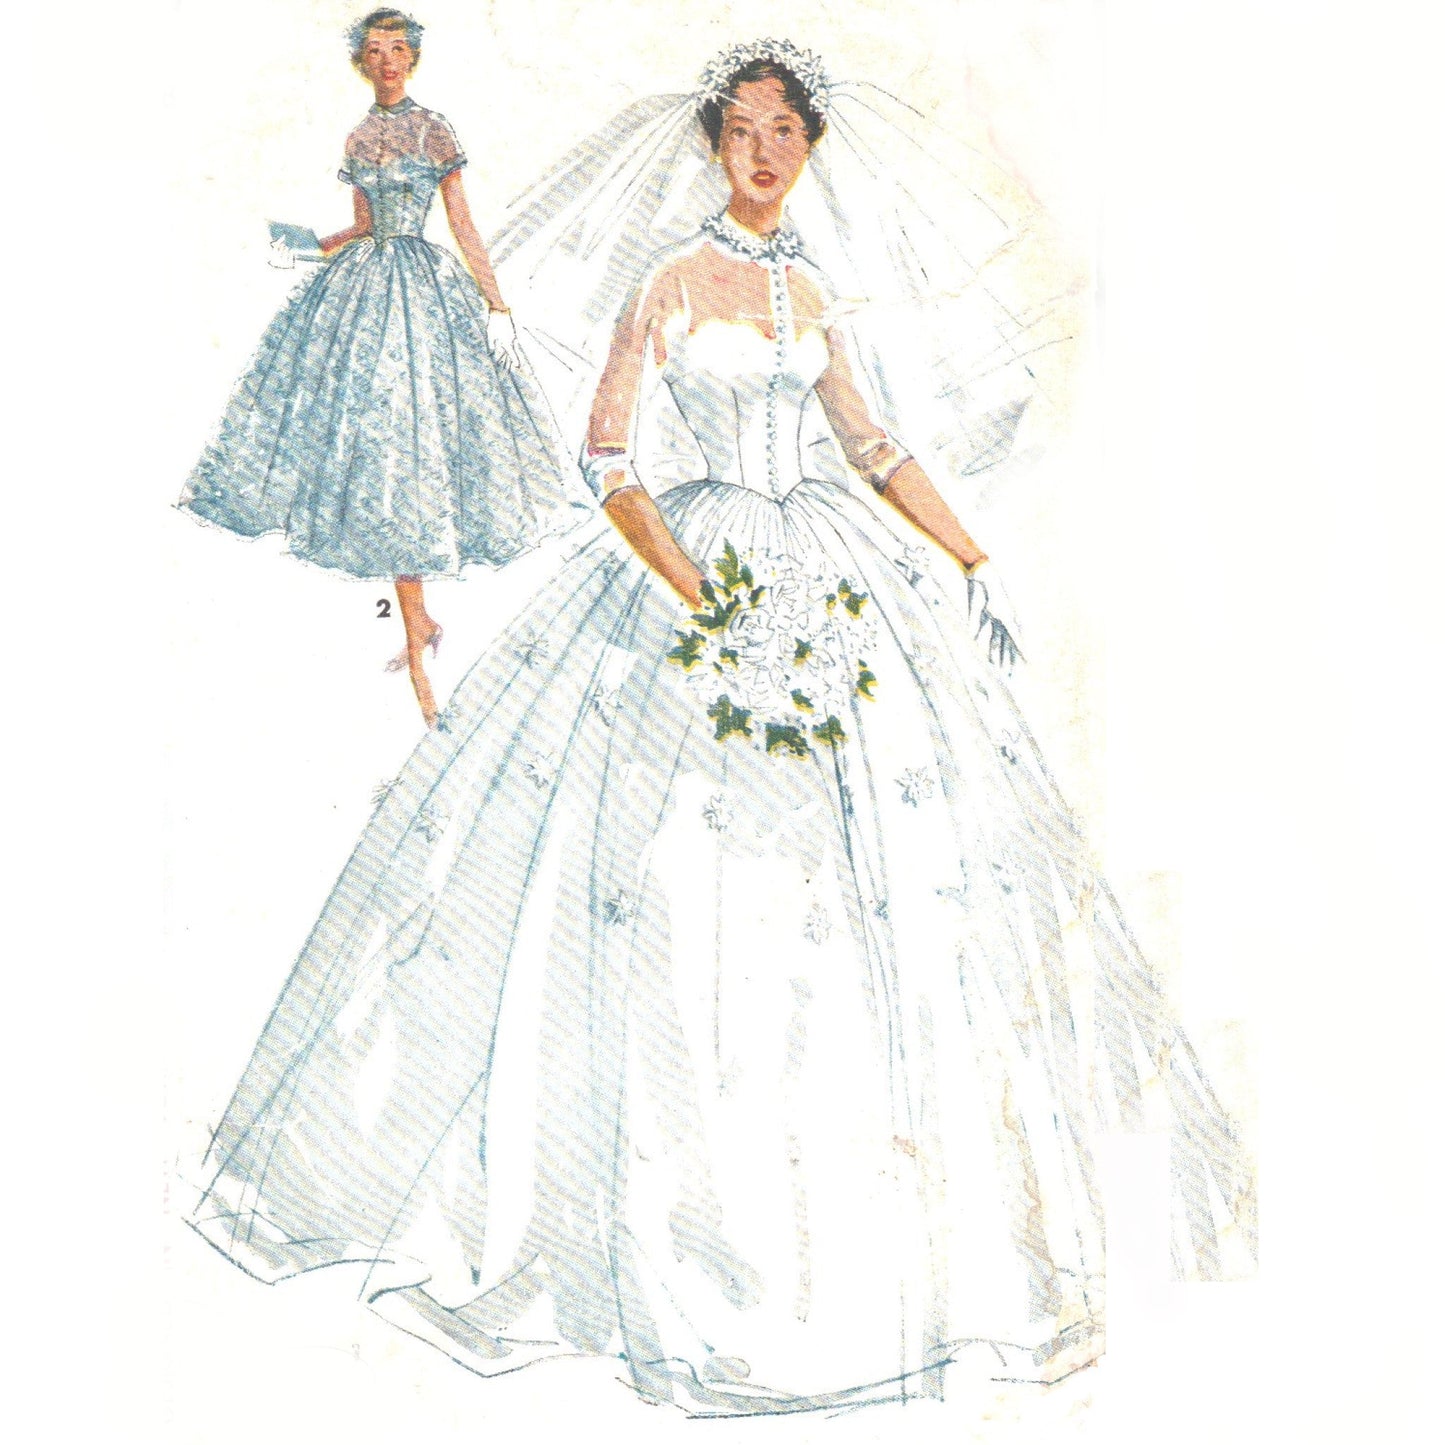 Model wearing bridal gown and bridesmaid dress made from Simplicity 4697 pattern